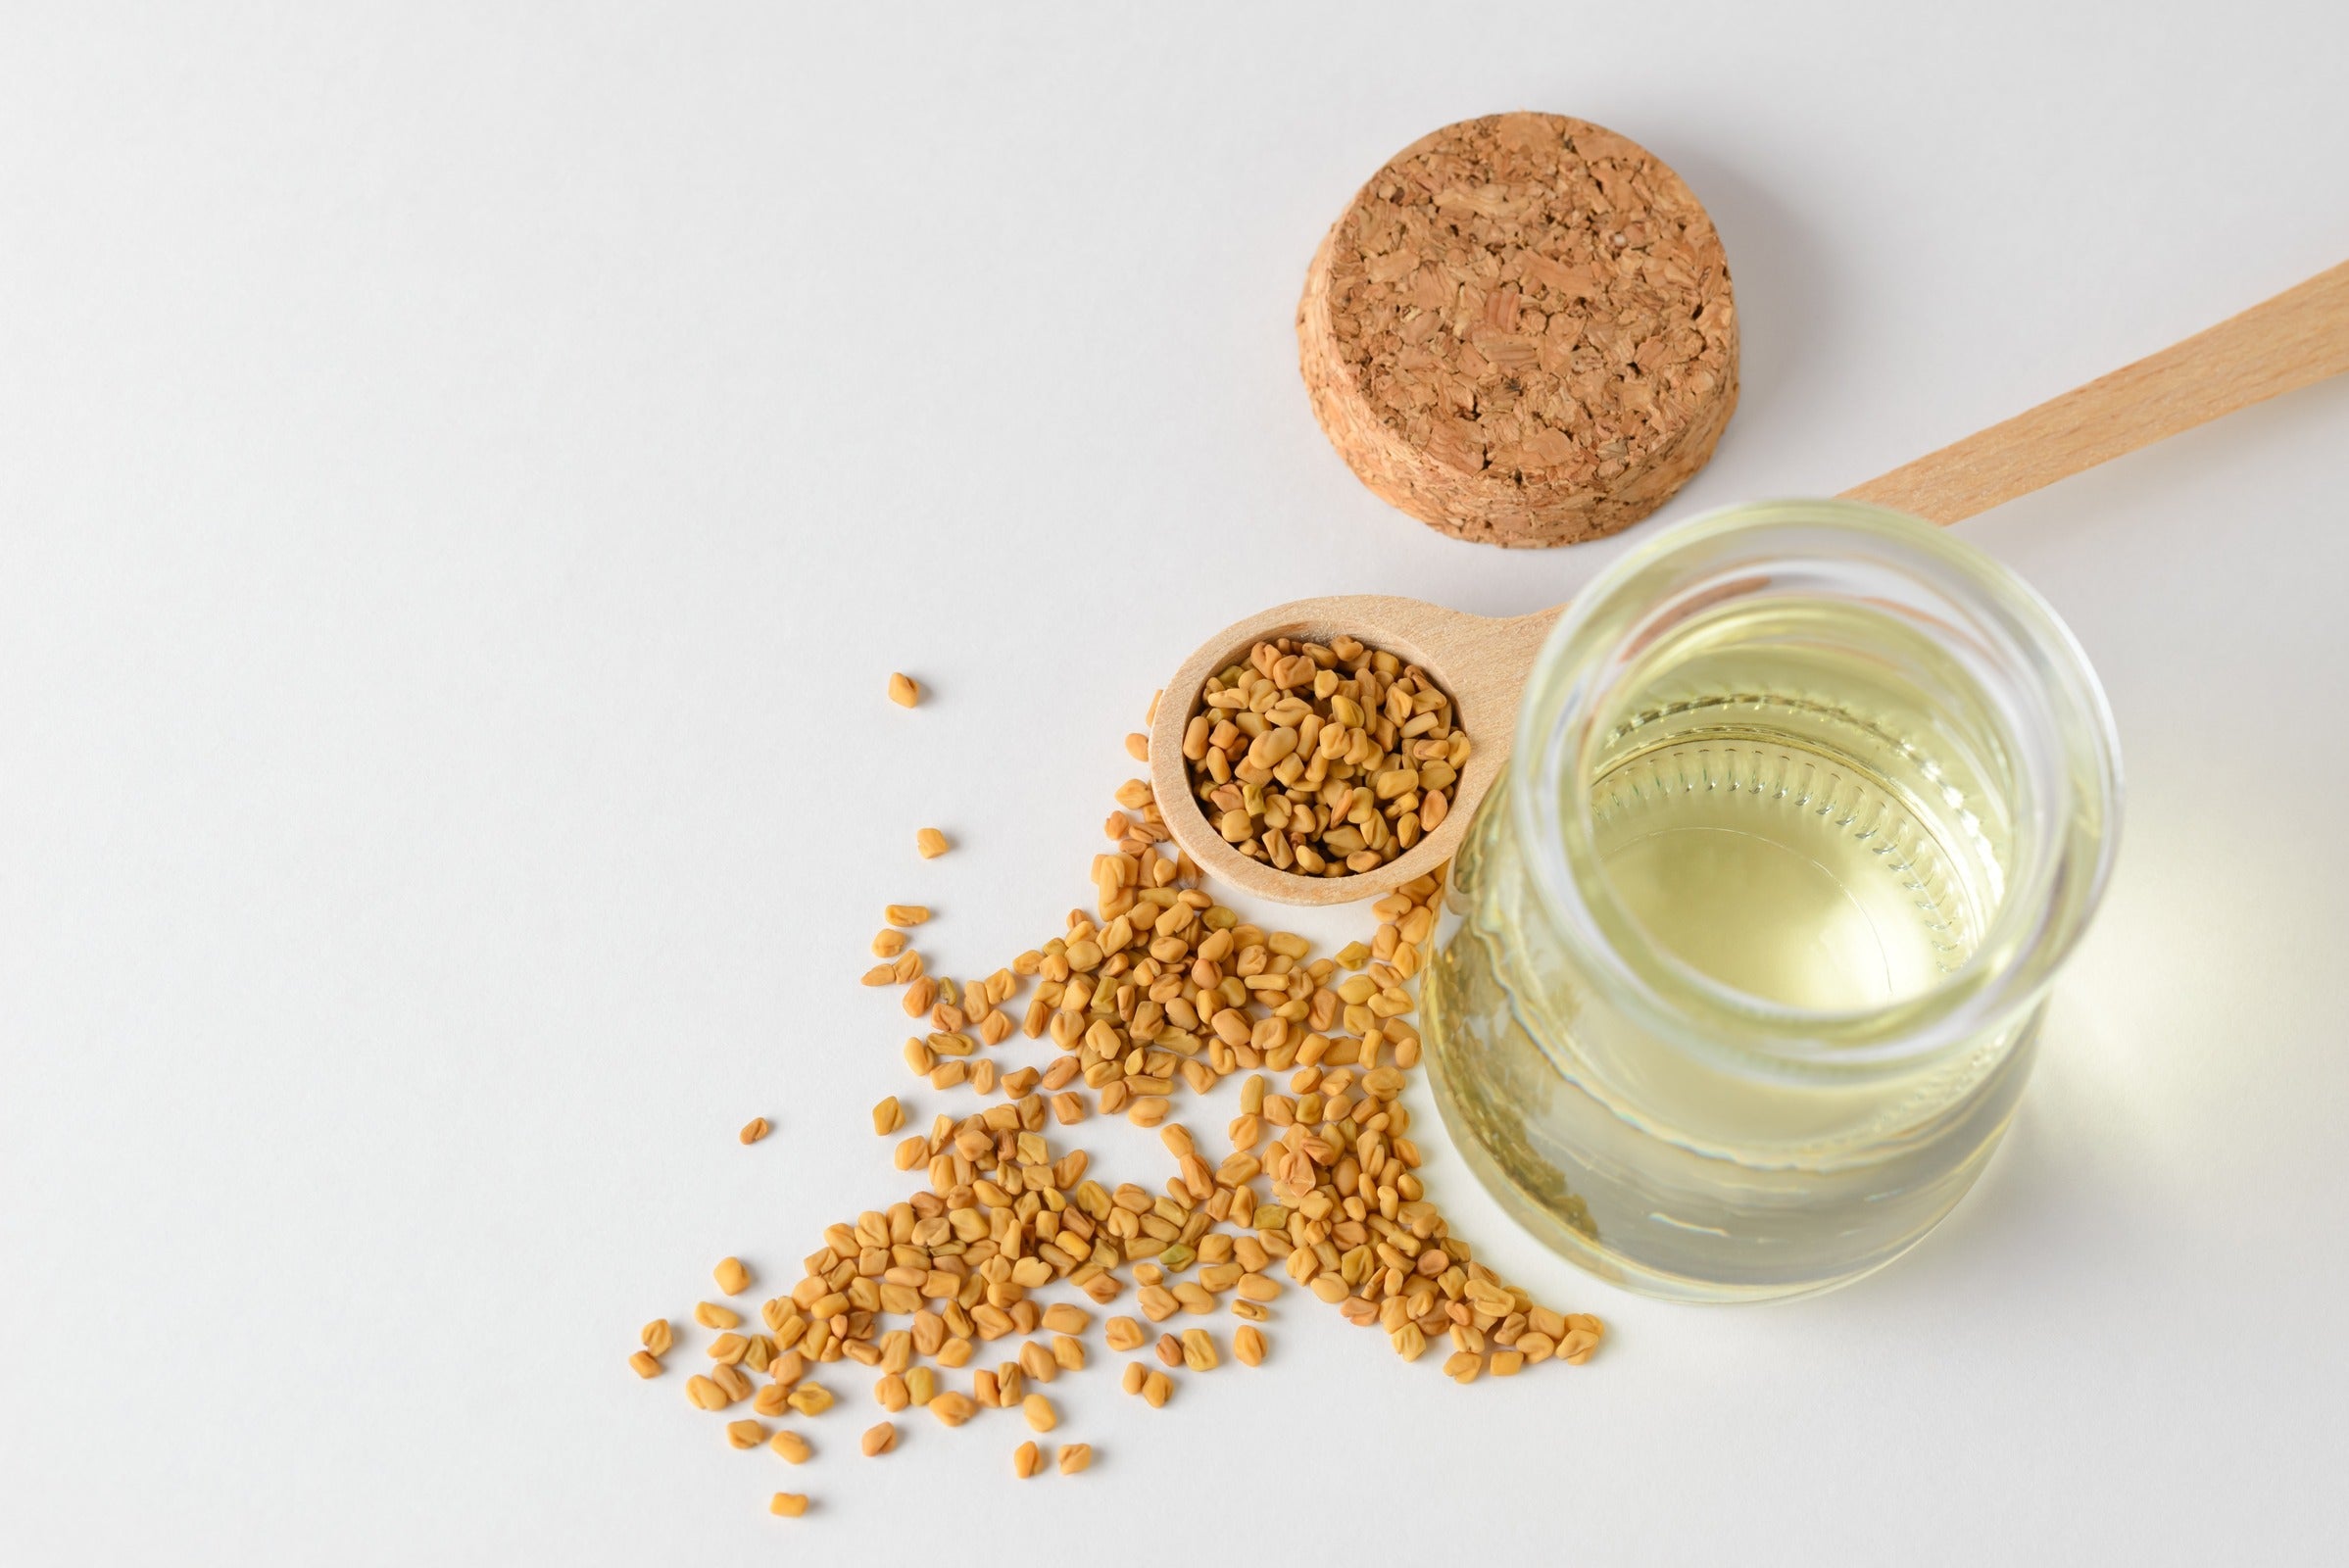 Natural Remedy for Bumpy Skin Irritation with Fenugreek Seeds